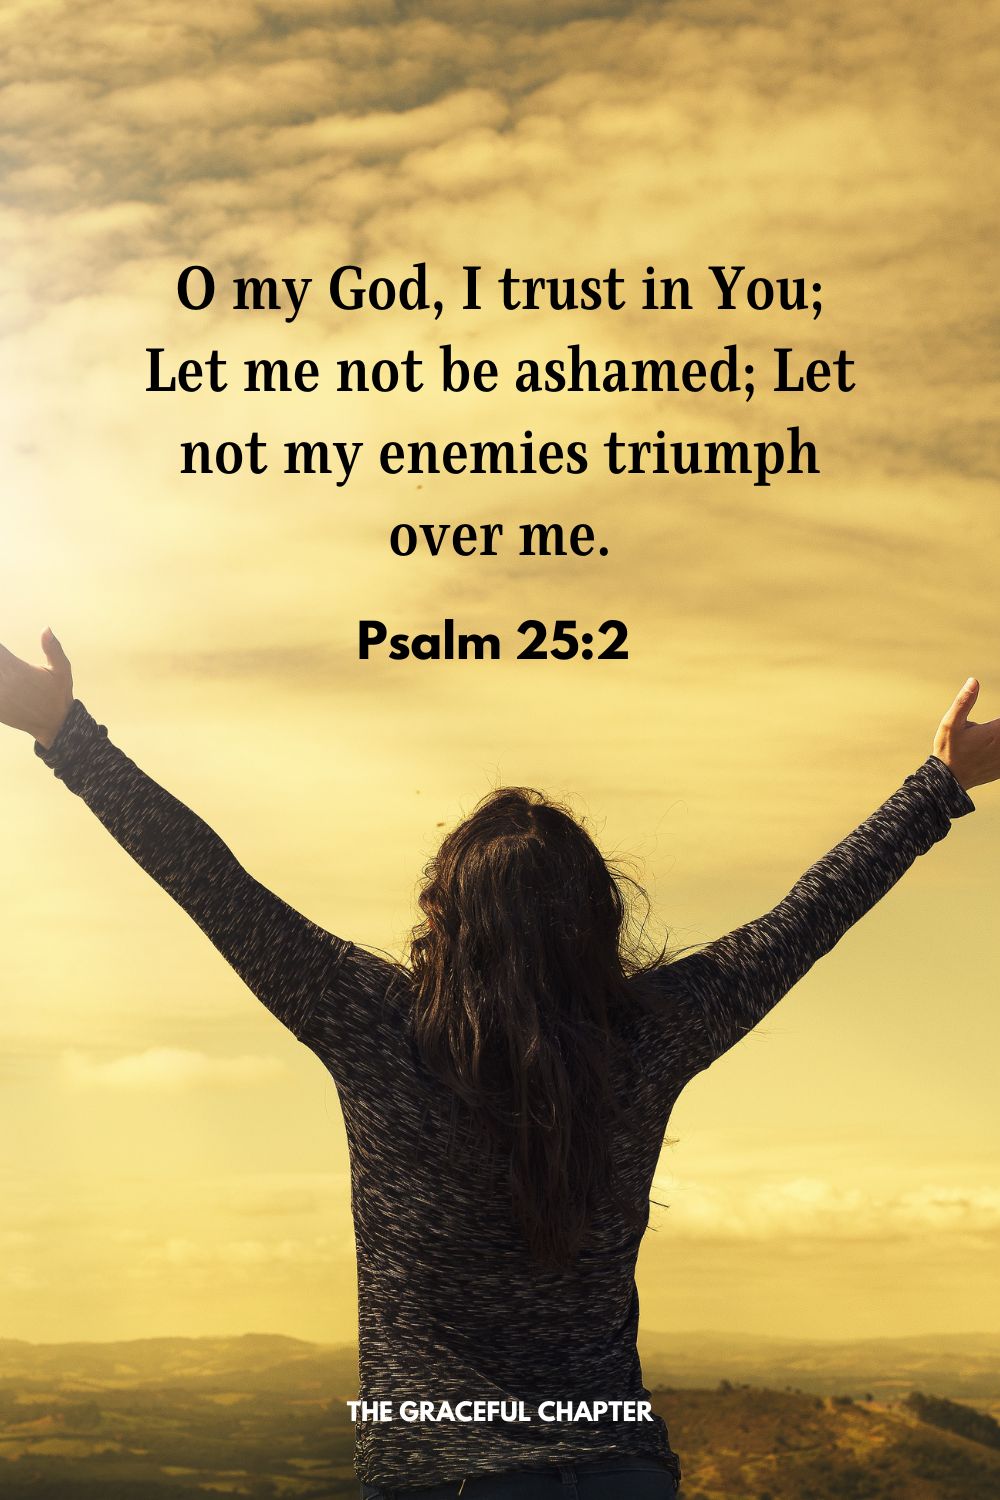 O my God, I trust in You; Let me not be ashamed; Let not my enemies triumph over me. Psalm 25:2 